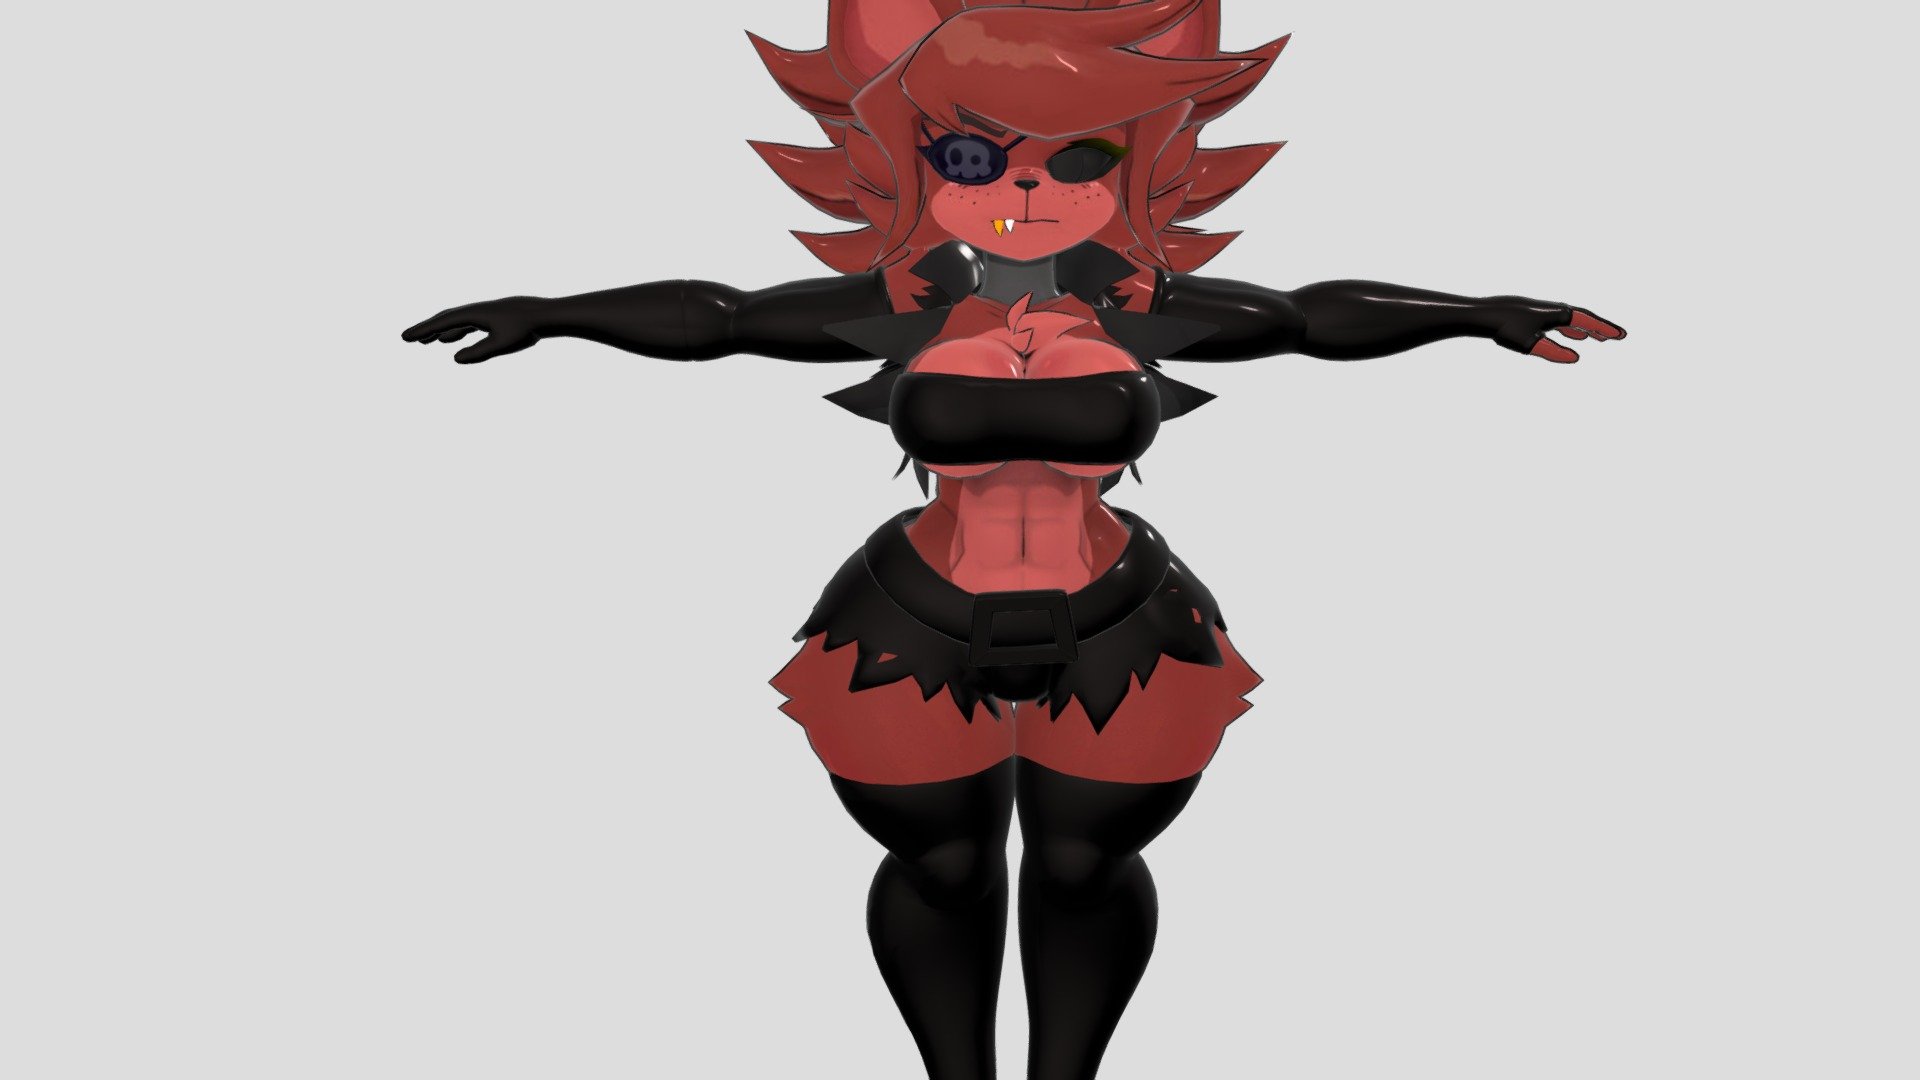 Foxy_with_balck_clothes_with_problems - 3D model by DJ the hellhound (@lonnatheHellhound) 3d model